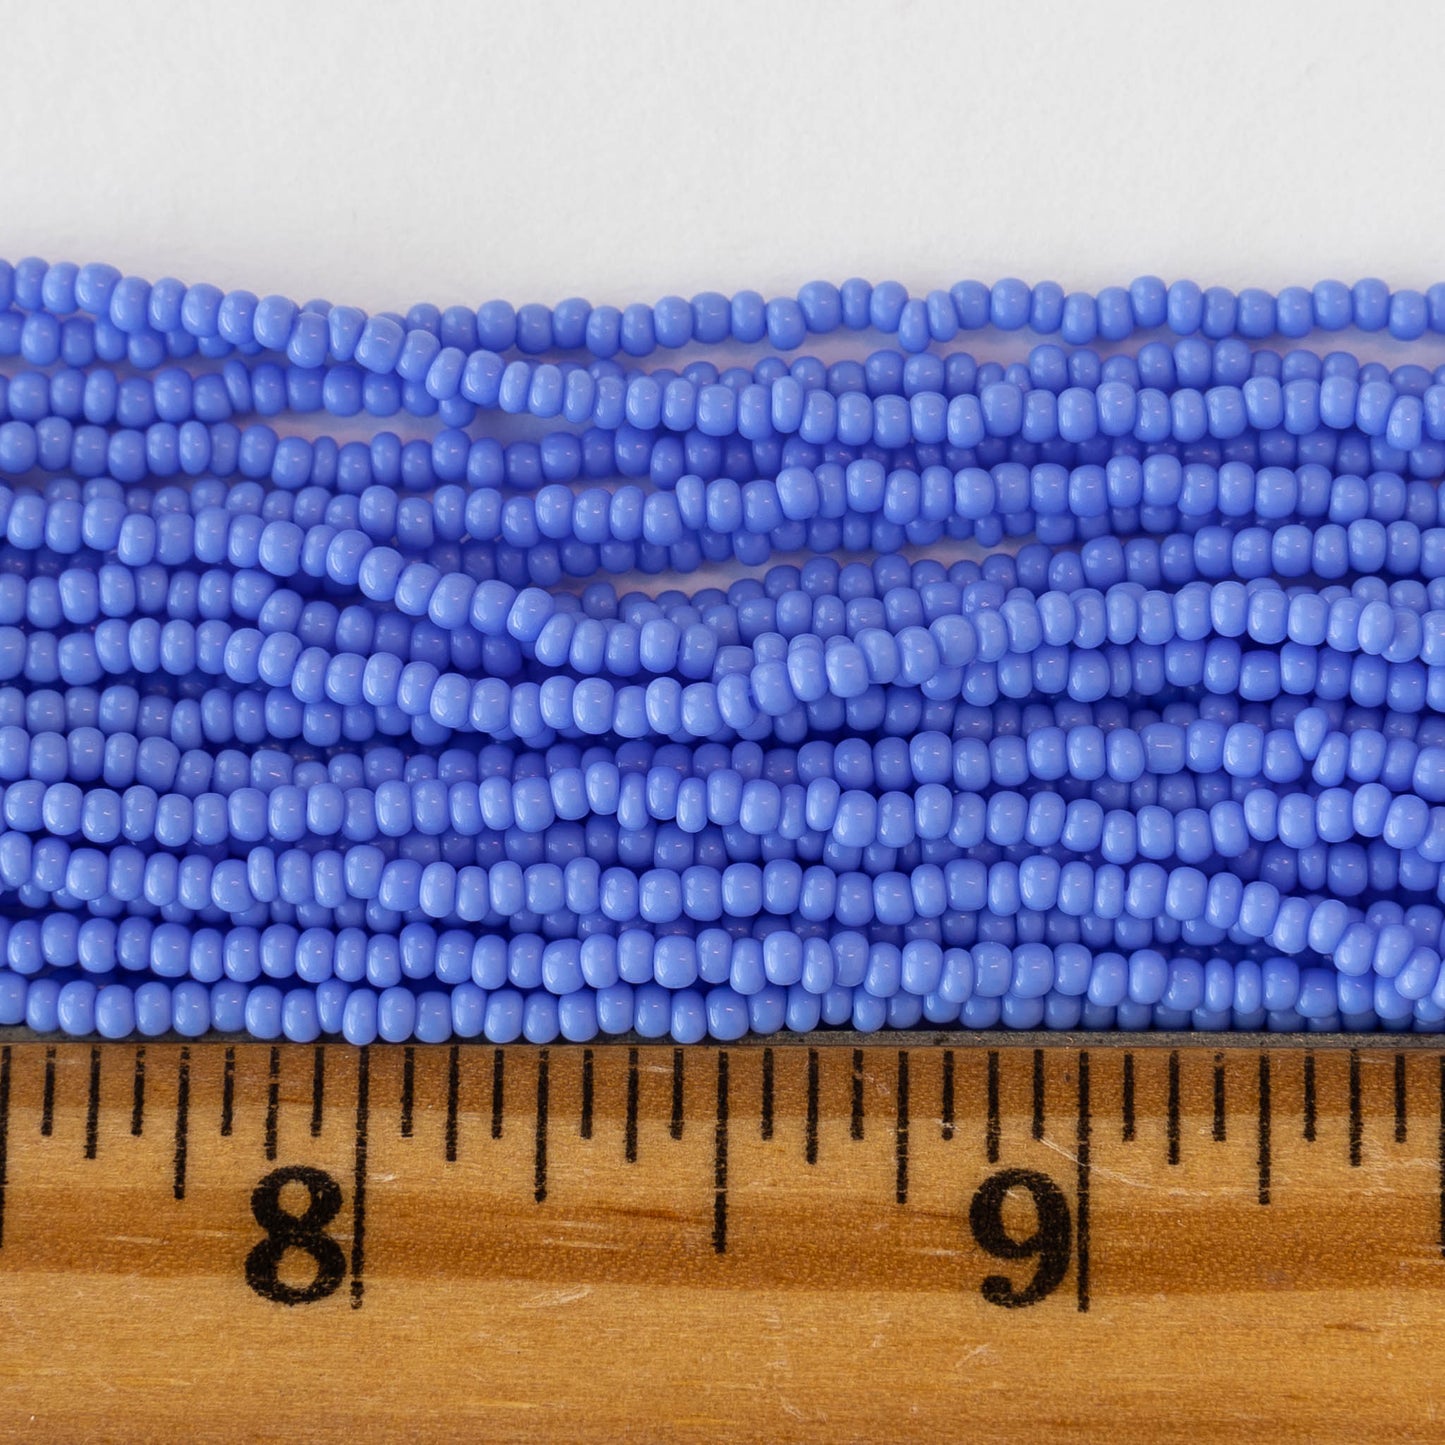 Load image into Gallery viewer, 12/0 Seed Beads - Opaque Periwinkle Blue - Choose Amount
